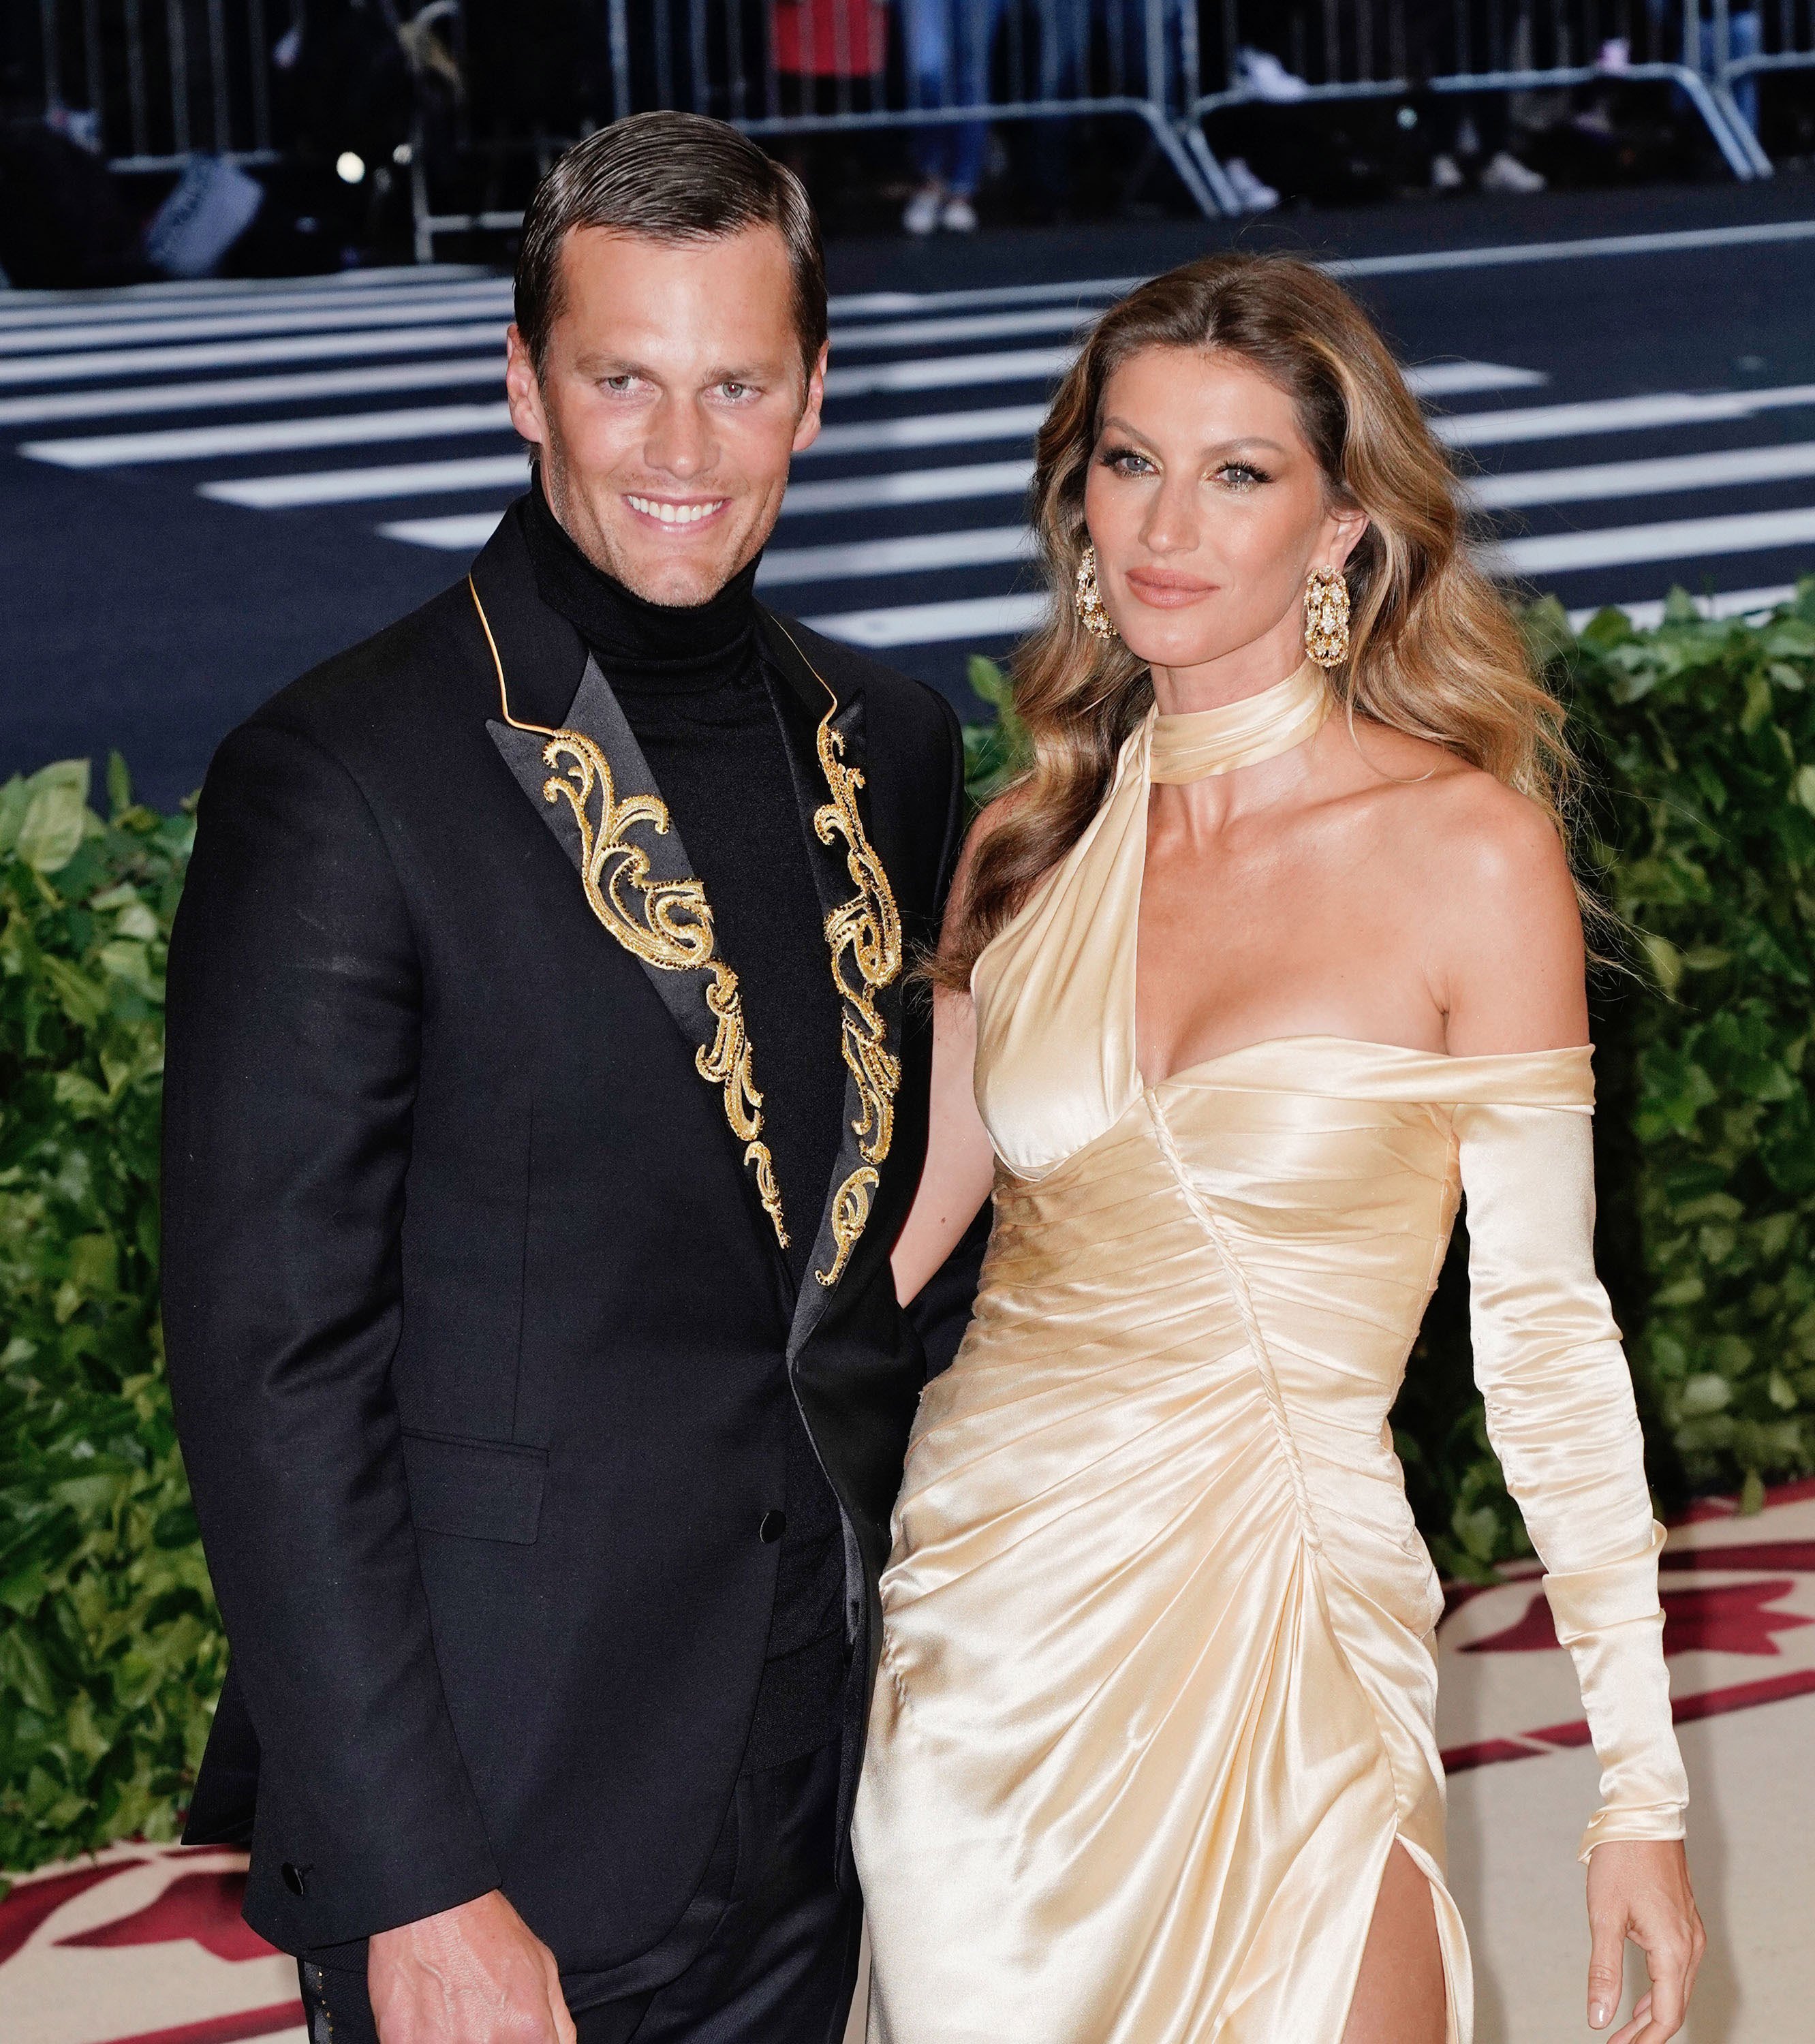 Tom Brady and Gisele Bündchen attends the Heavenly Bodies: Fashion & The Catholic Imagination Costume Institute Gala in New York in May 2018 | Photo: Getty Images